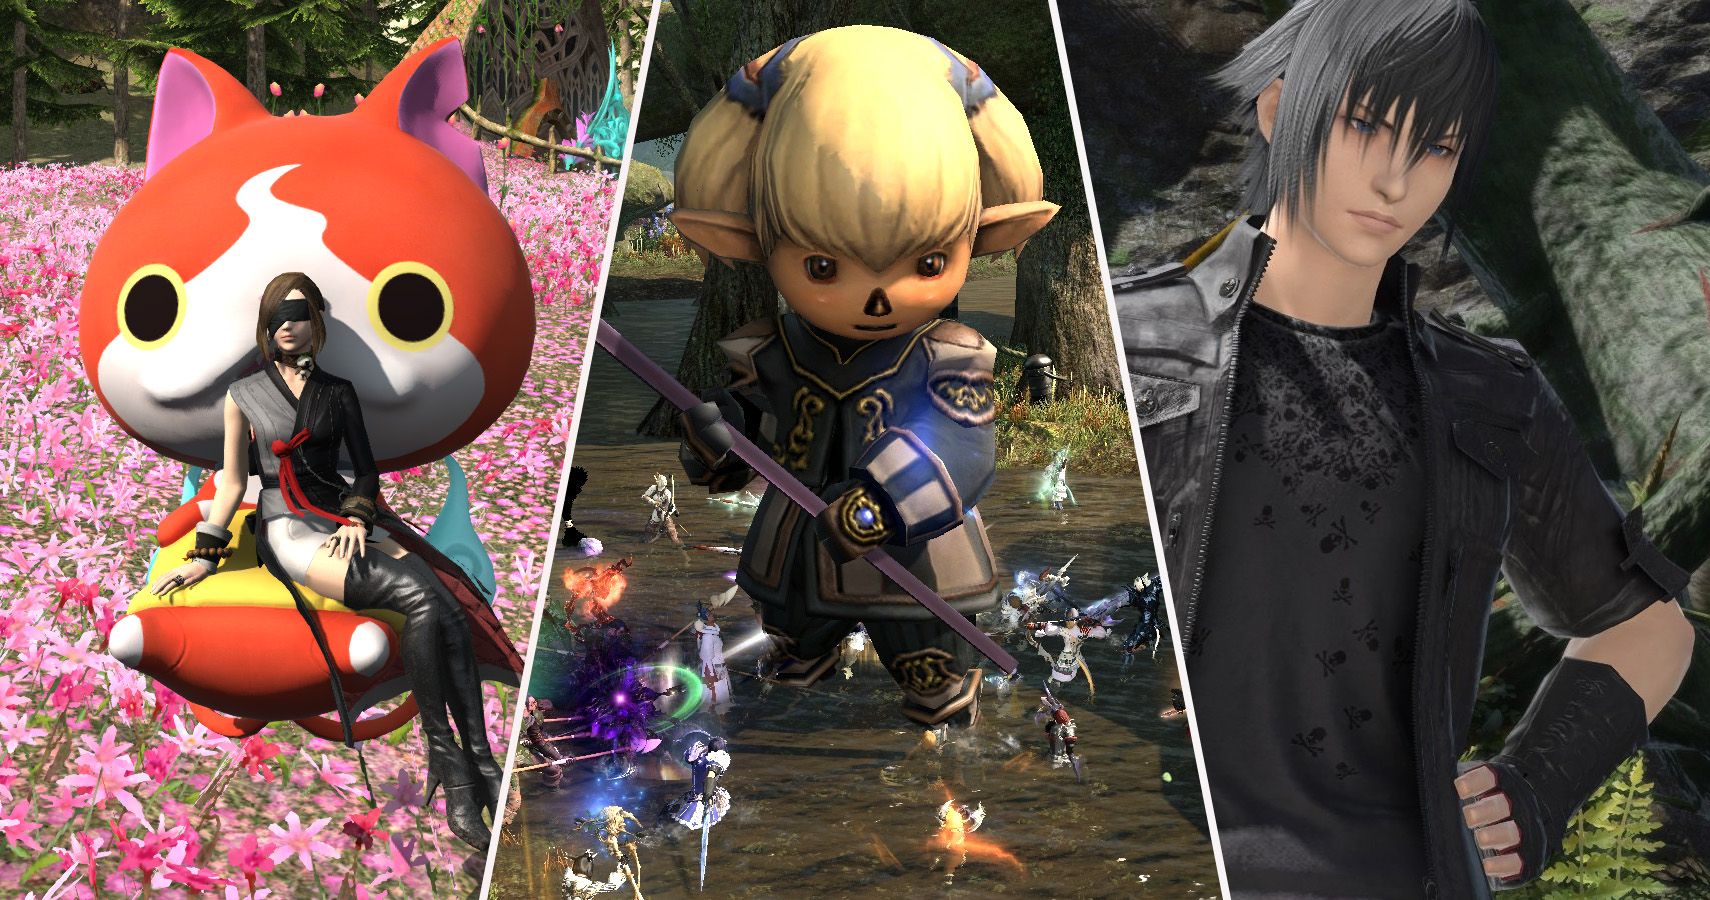 Ffxiv Garo Event Guide In Case You Missed It The Garo Gear Sets